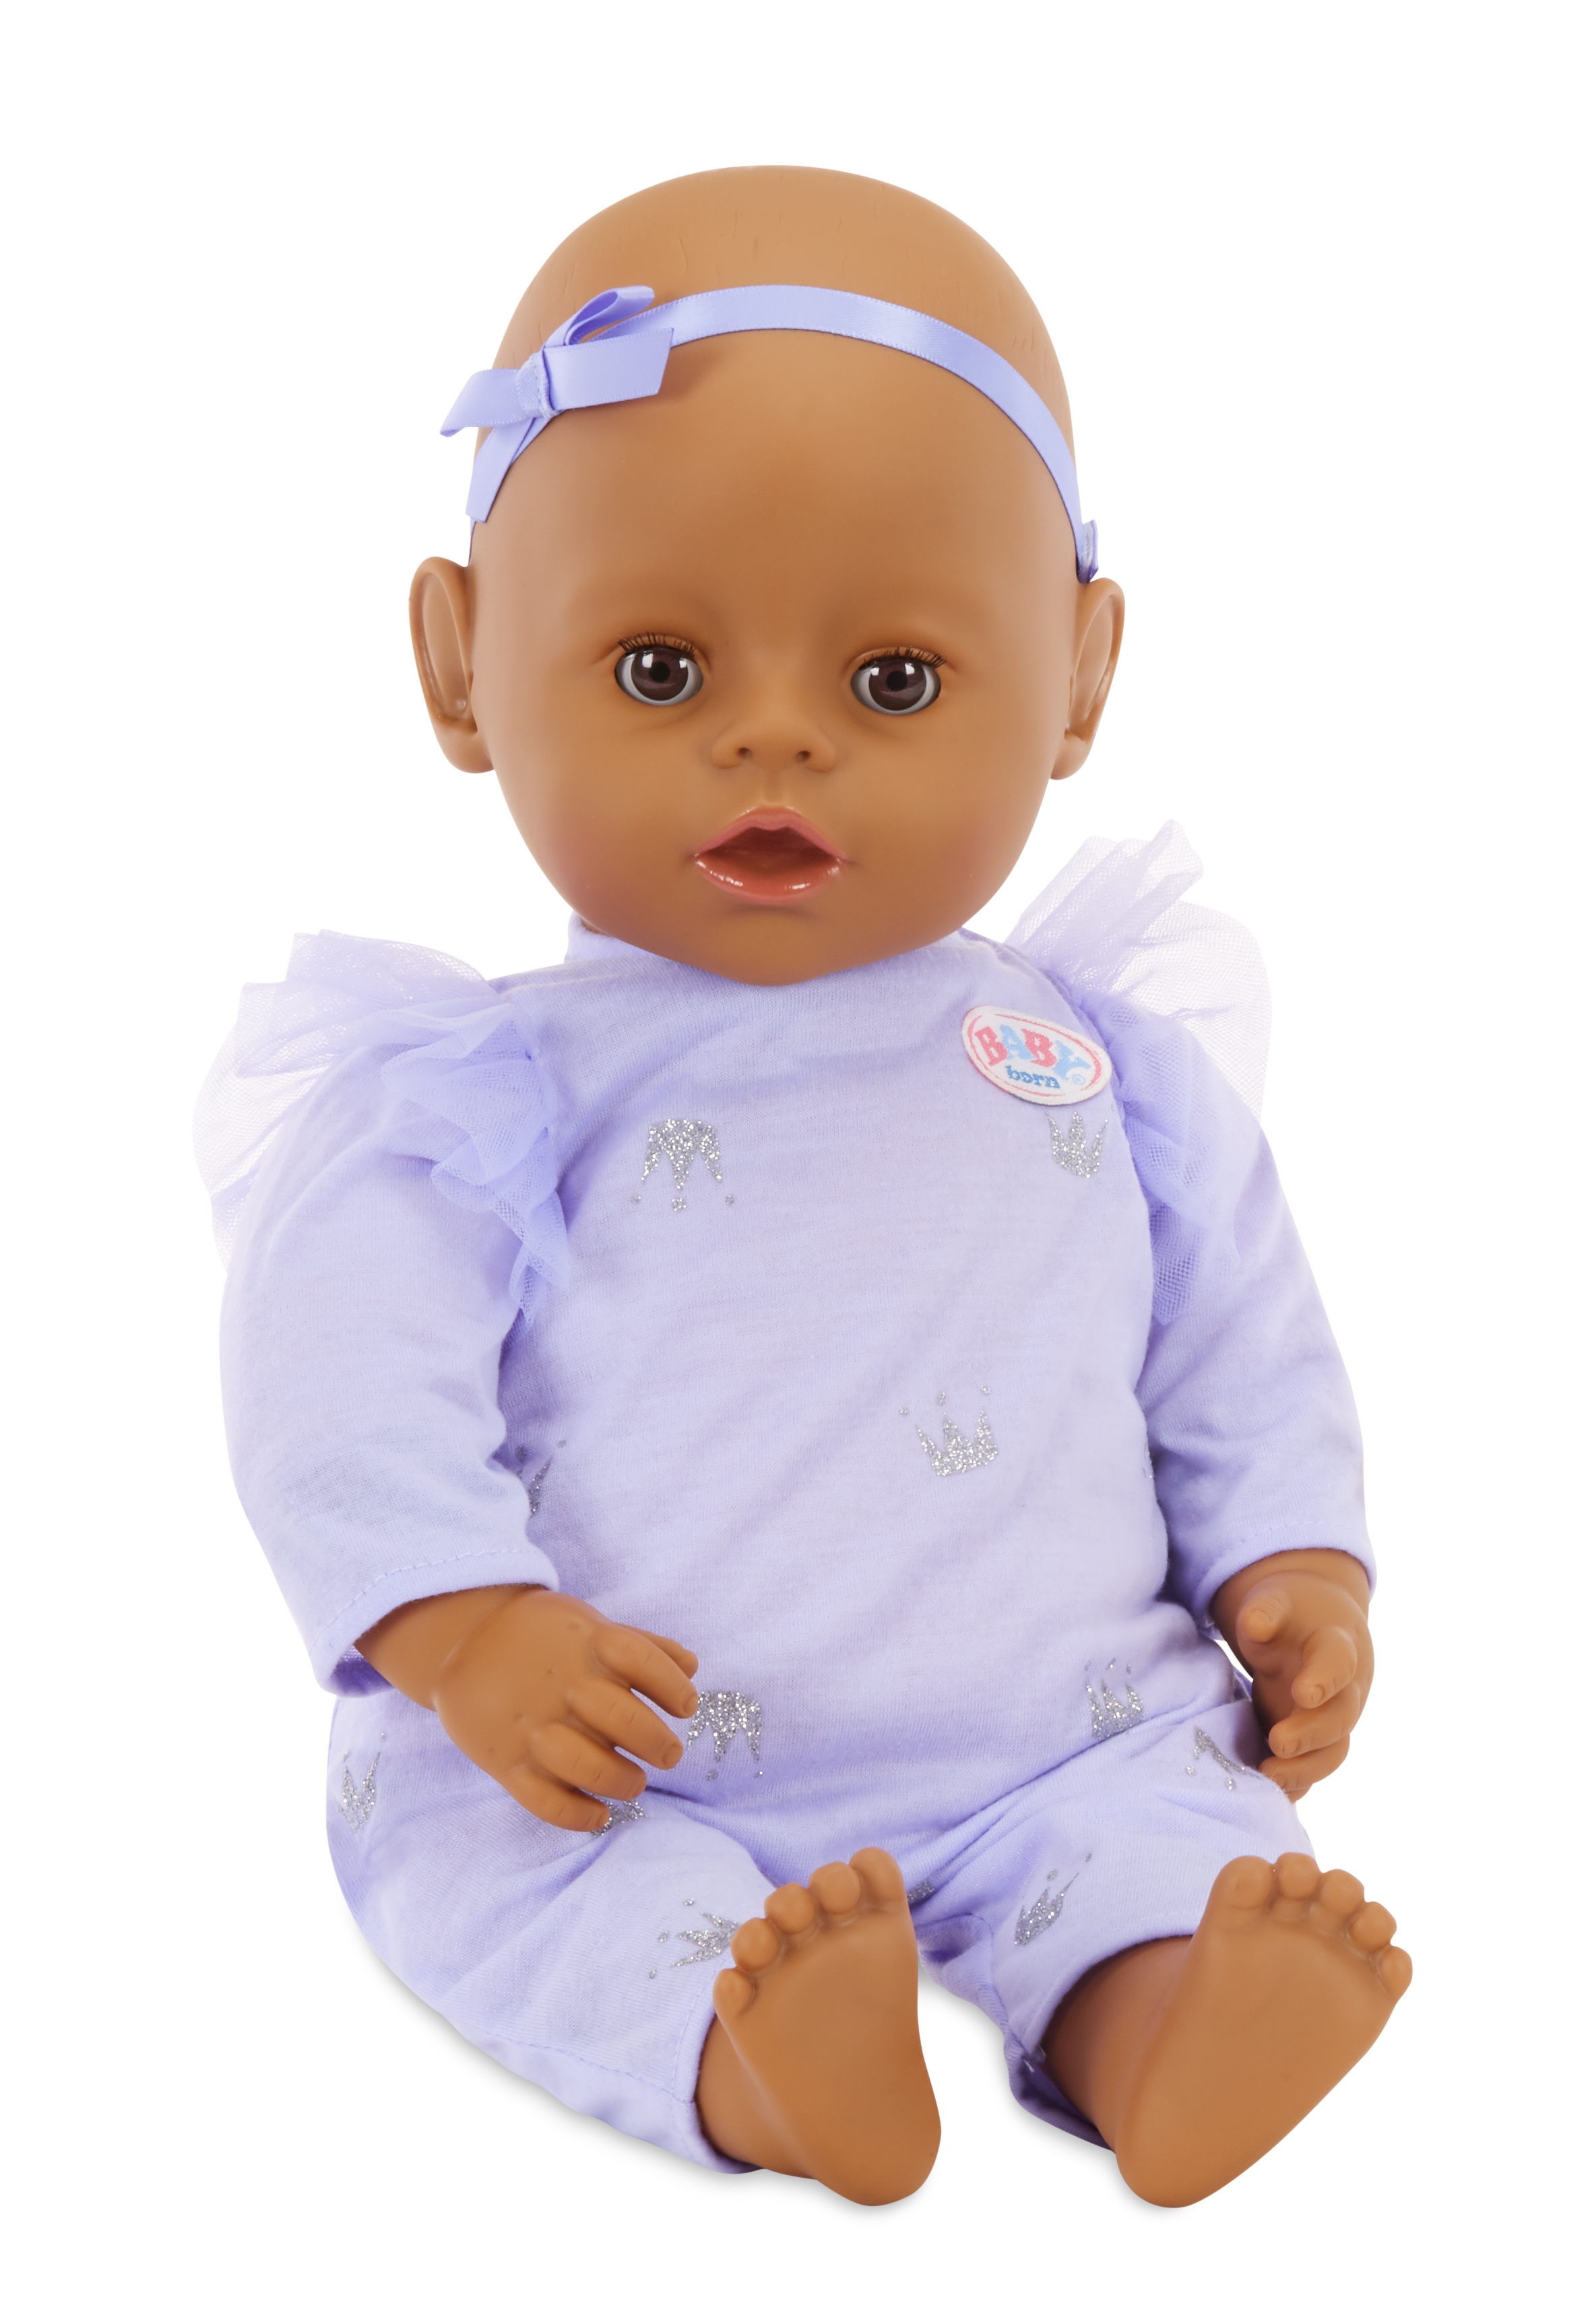 Baby Born - Mommy Make Me Better - Interactive Baby Doll - Brown Eyes - image 3 of 7